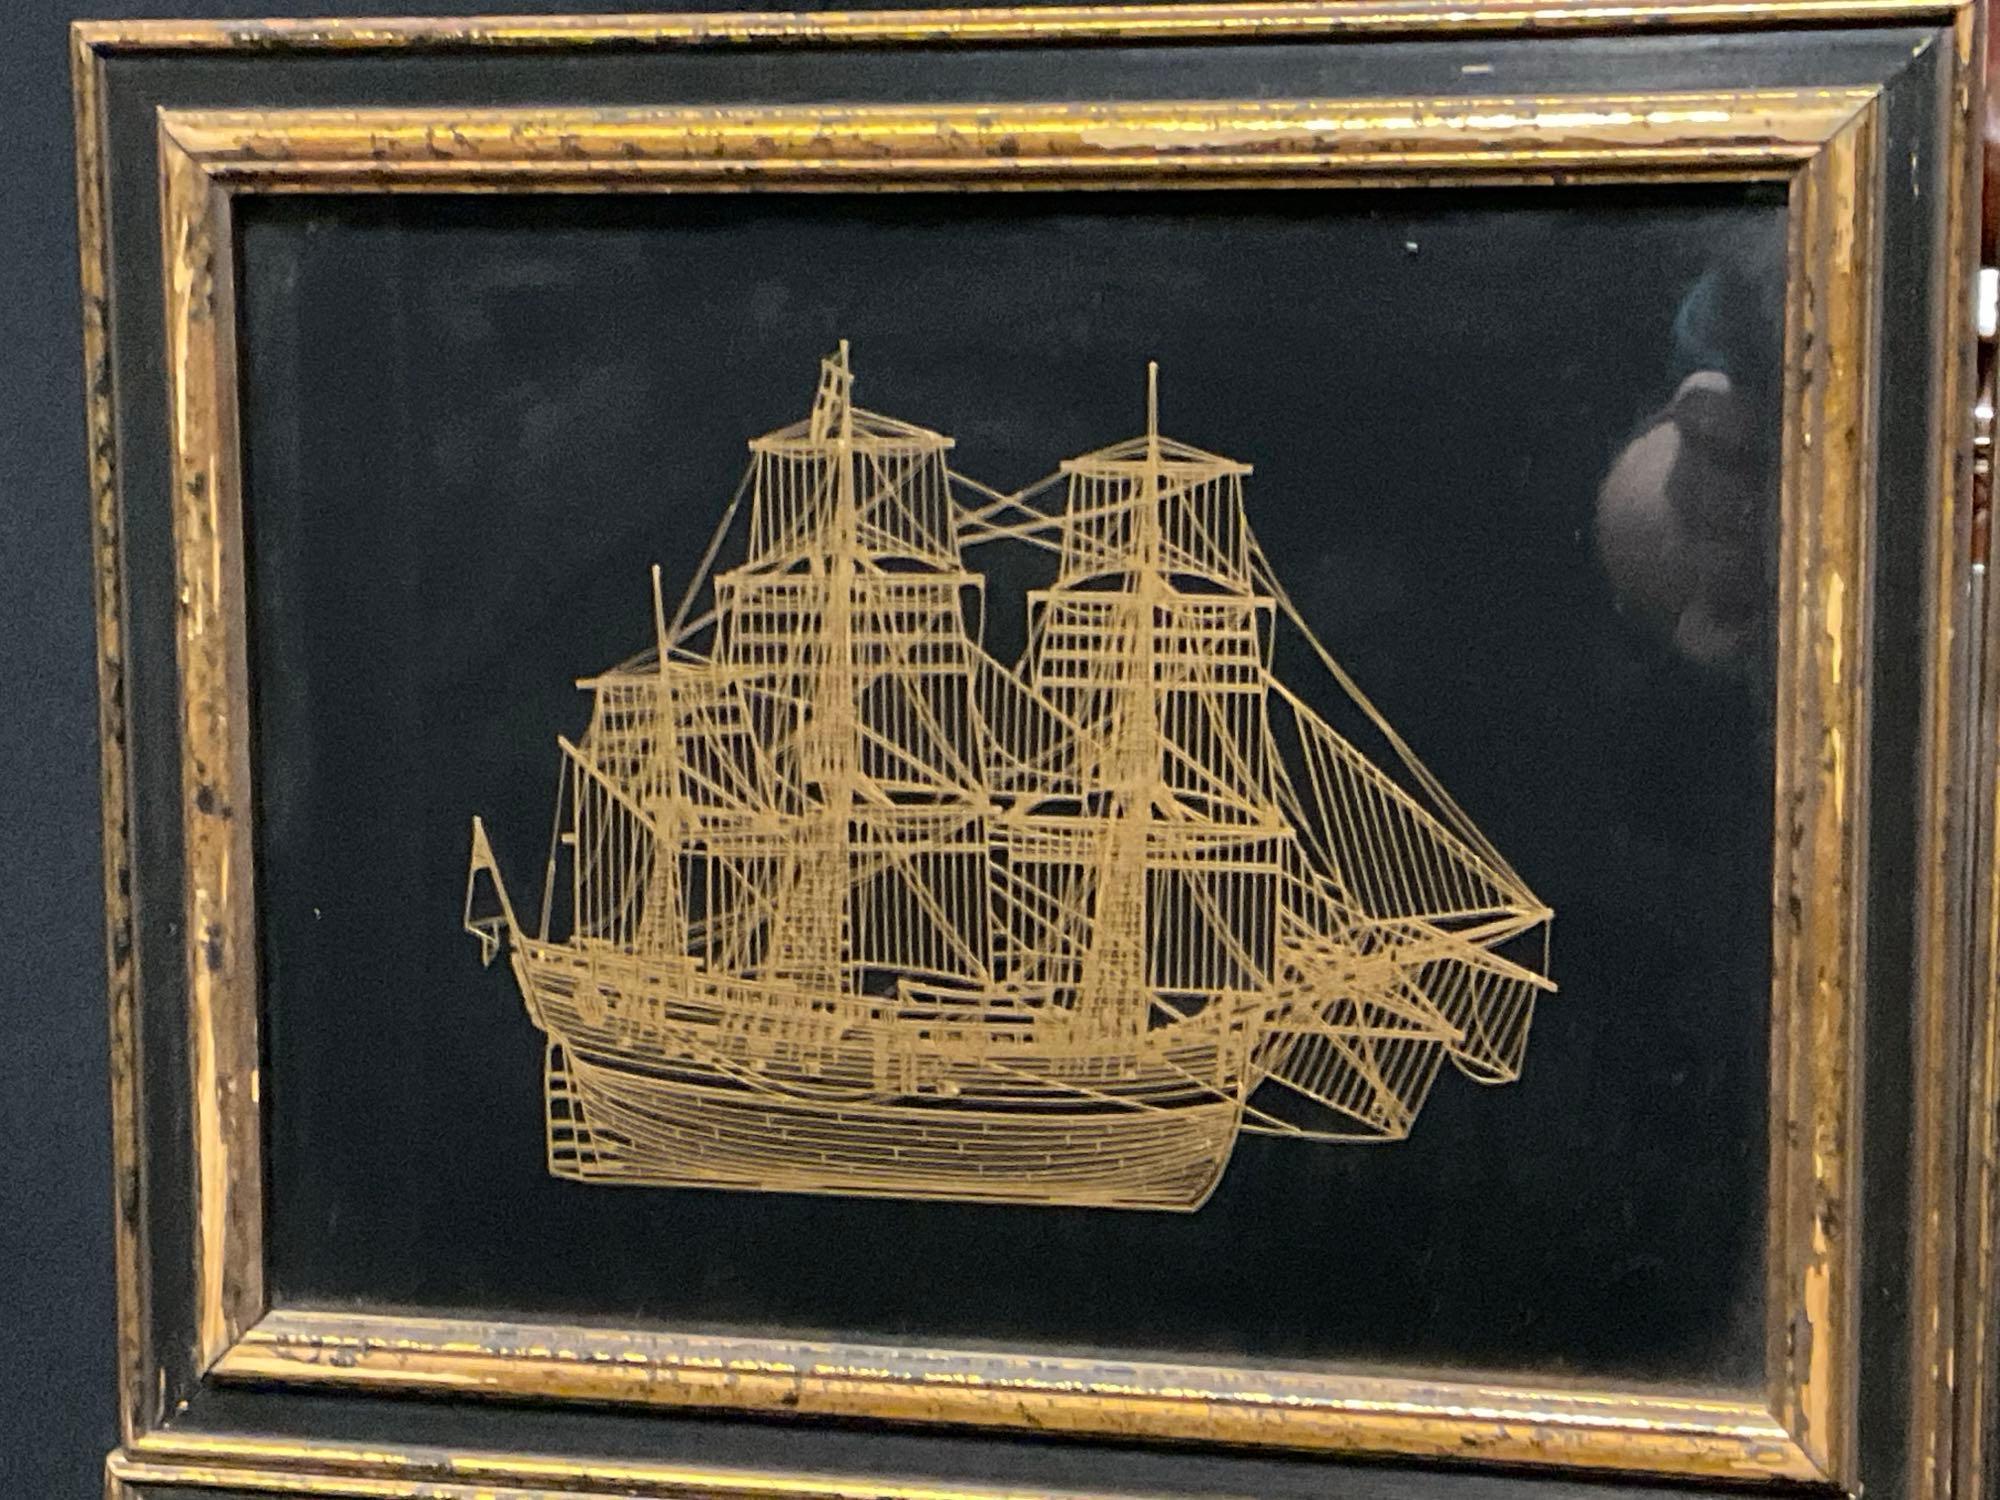 4x Framed Golden Silhouettes, titled The Trinidad, The Golden Hind, The Sao Gabriel, The Endeavor